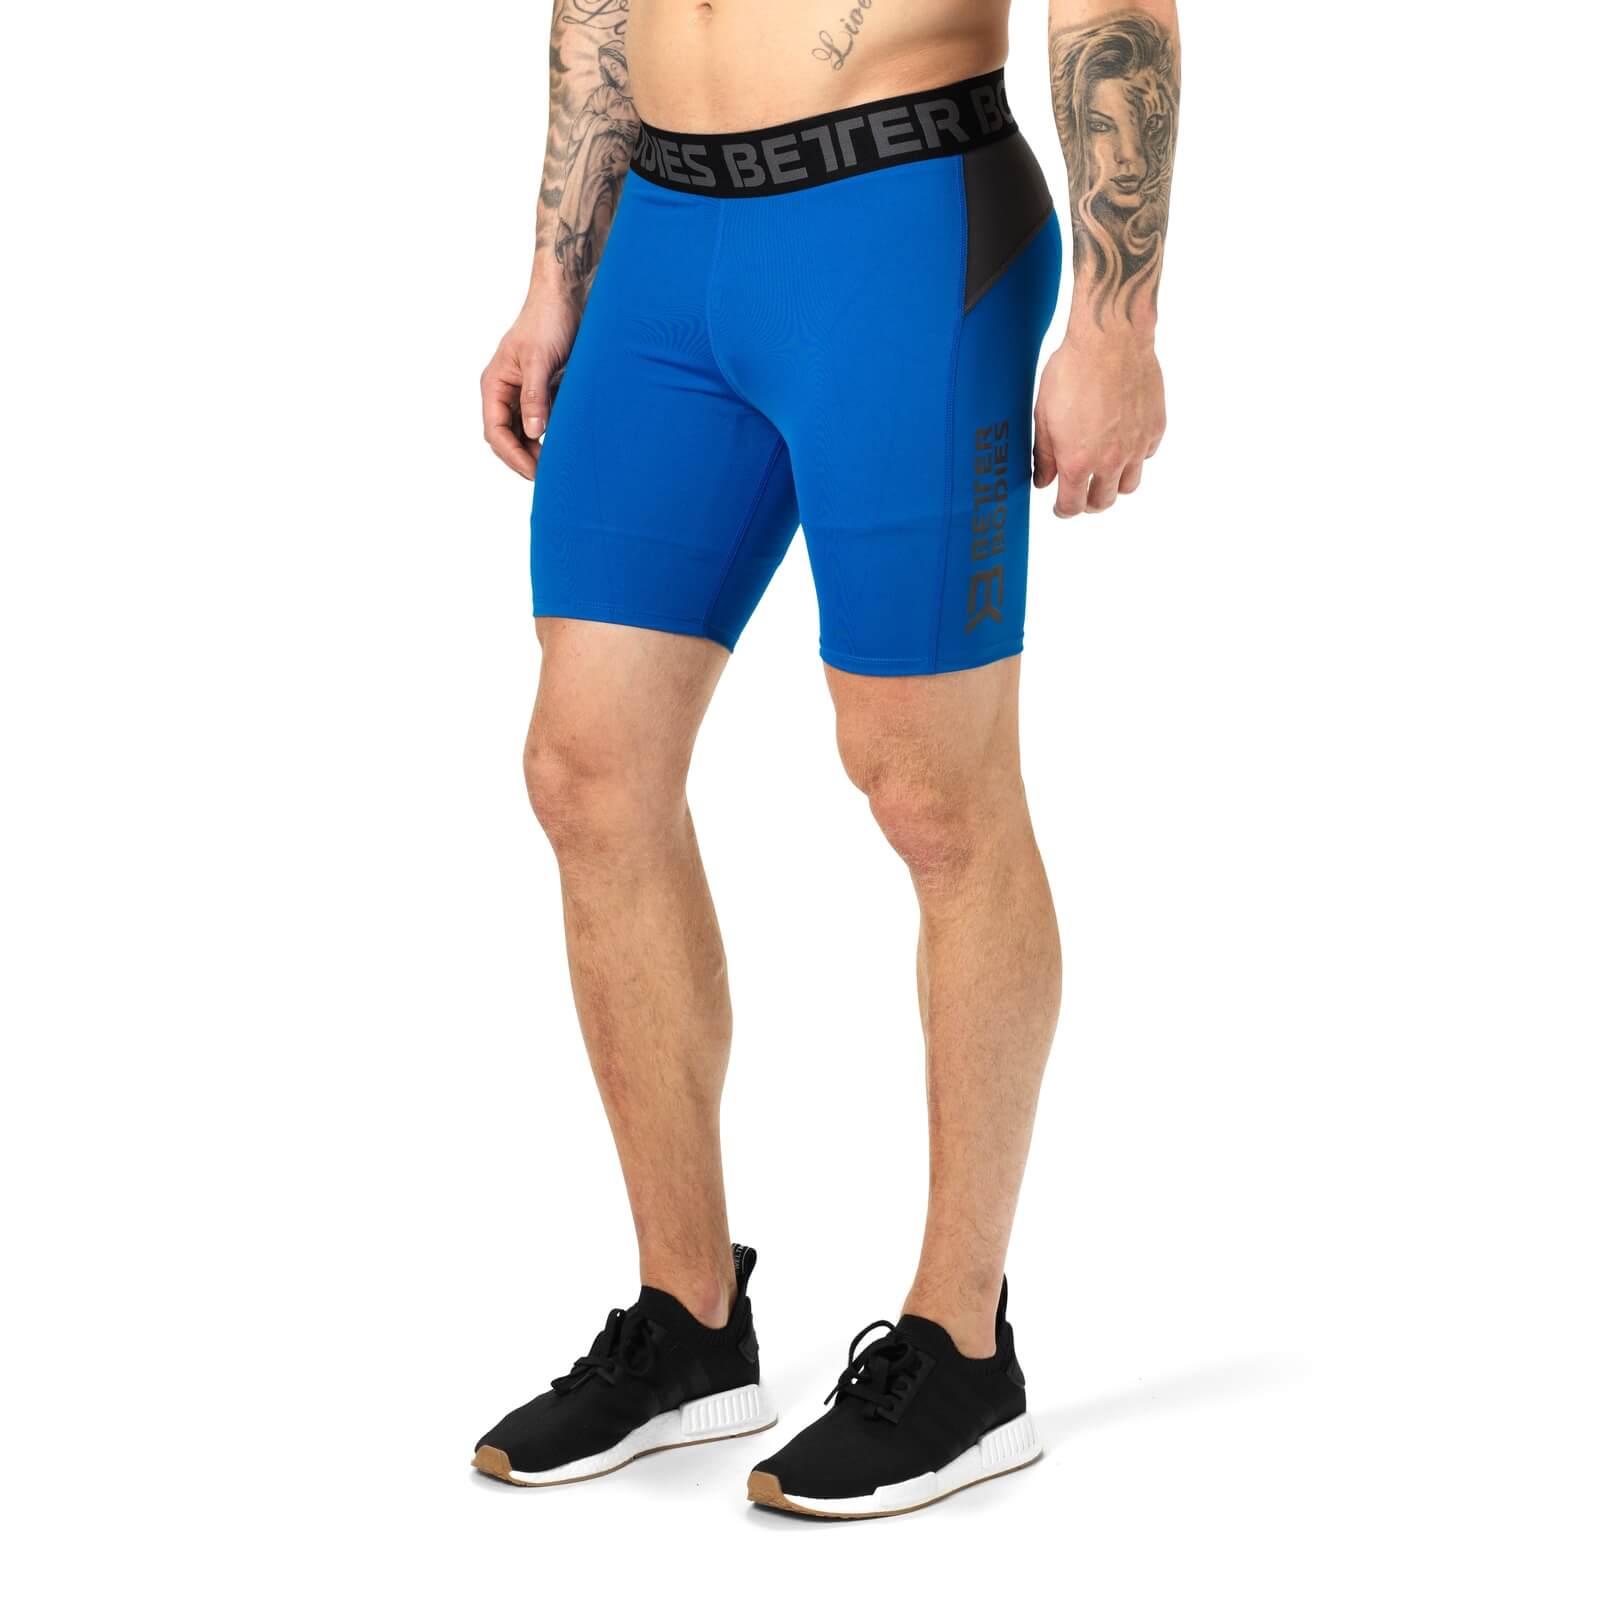 Compression Shorts, strong blue, Better Bodies